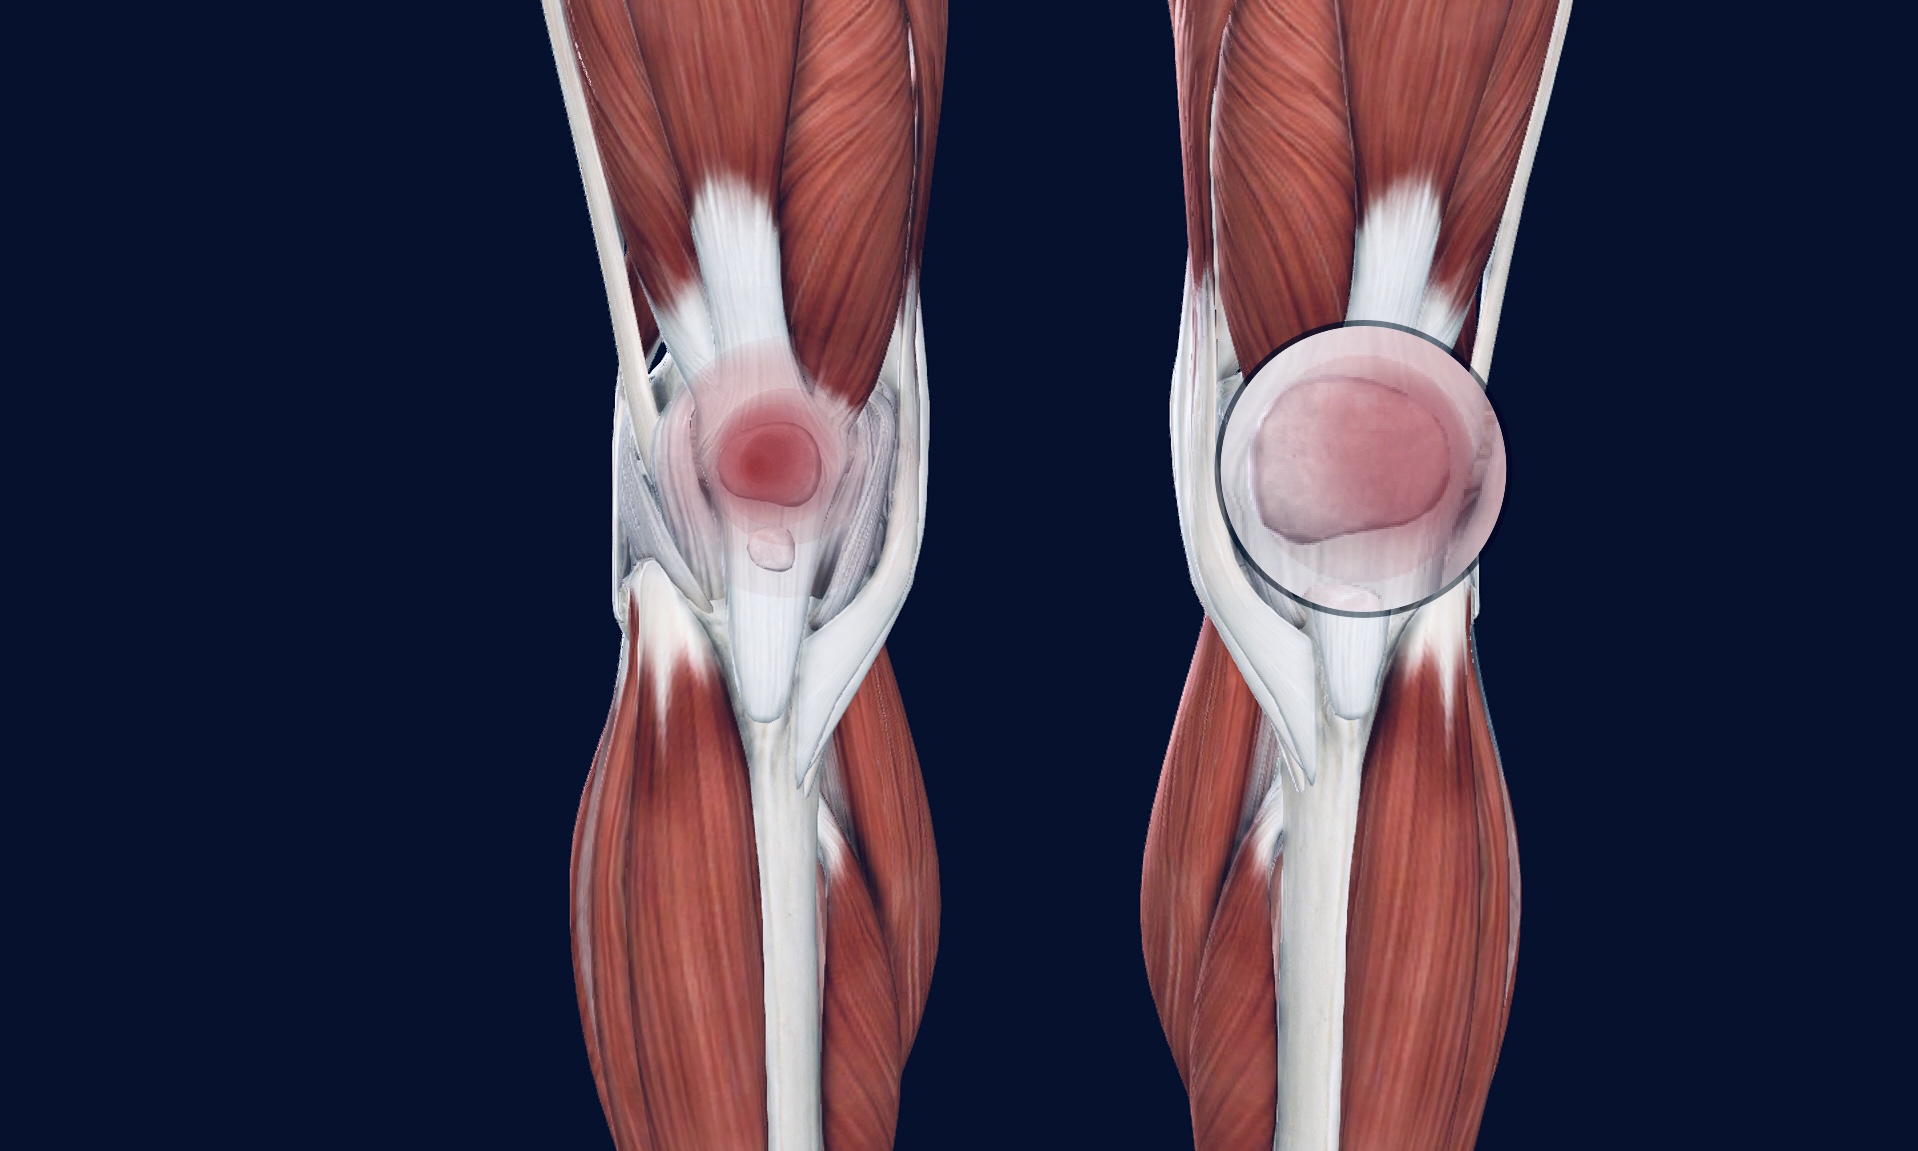 Patellofemoral Syndrome Osteo Health Osteopath Clinic In Calgary